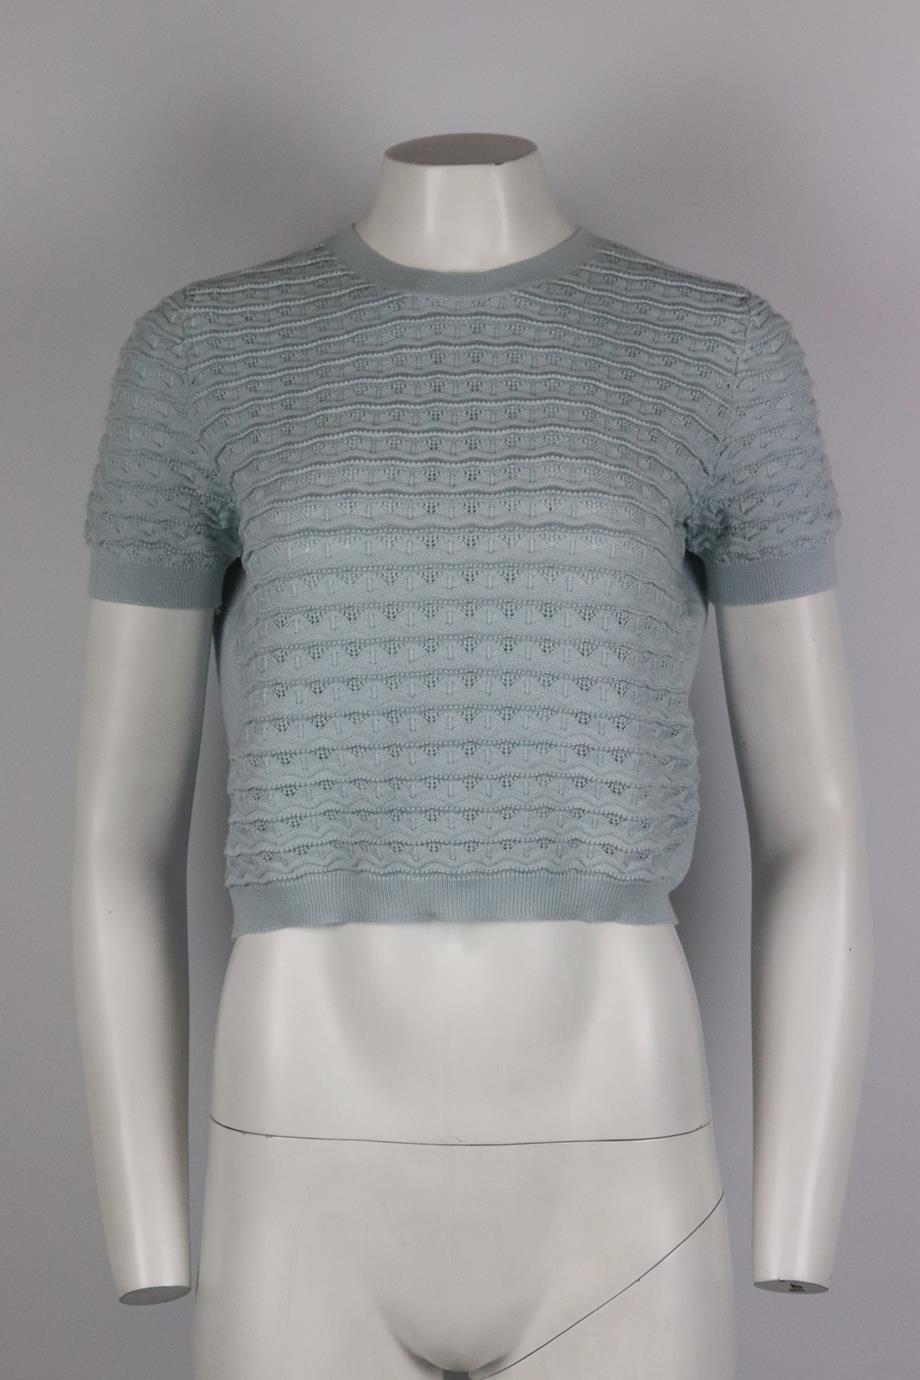 Miu Miu pointelle knit cashmere blend sweater. Blue. Short sleeve, crew neck. Pull on. 70% Cashmere, 30% silk. Size: IT 42 (UK 10, US 6, FR 38). Bust: 37 in. Waist: 35 in. Hips: 30 in. Length: 17 in. Very good condition - No sign of wear; see